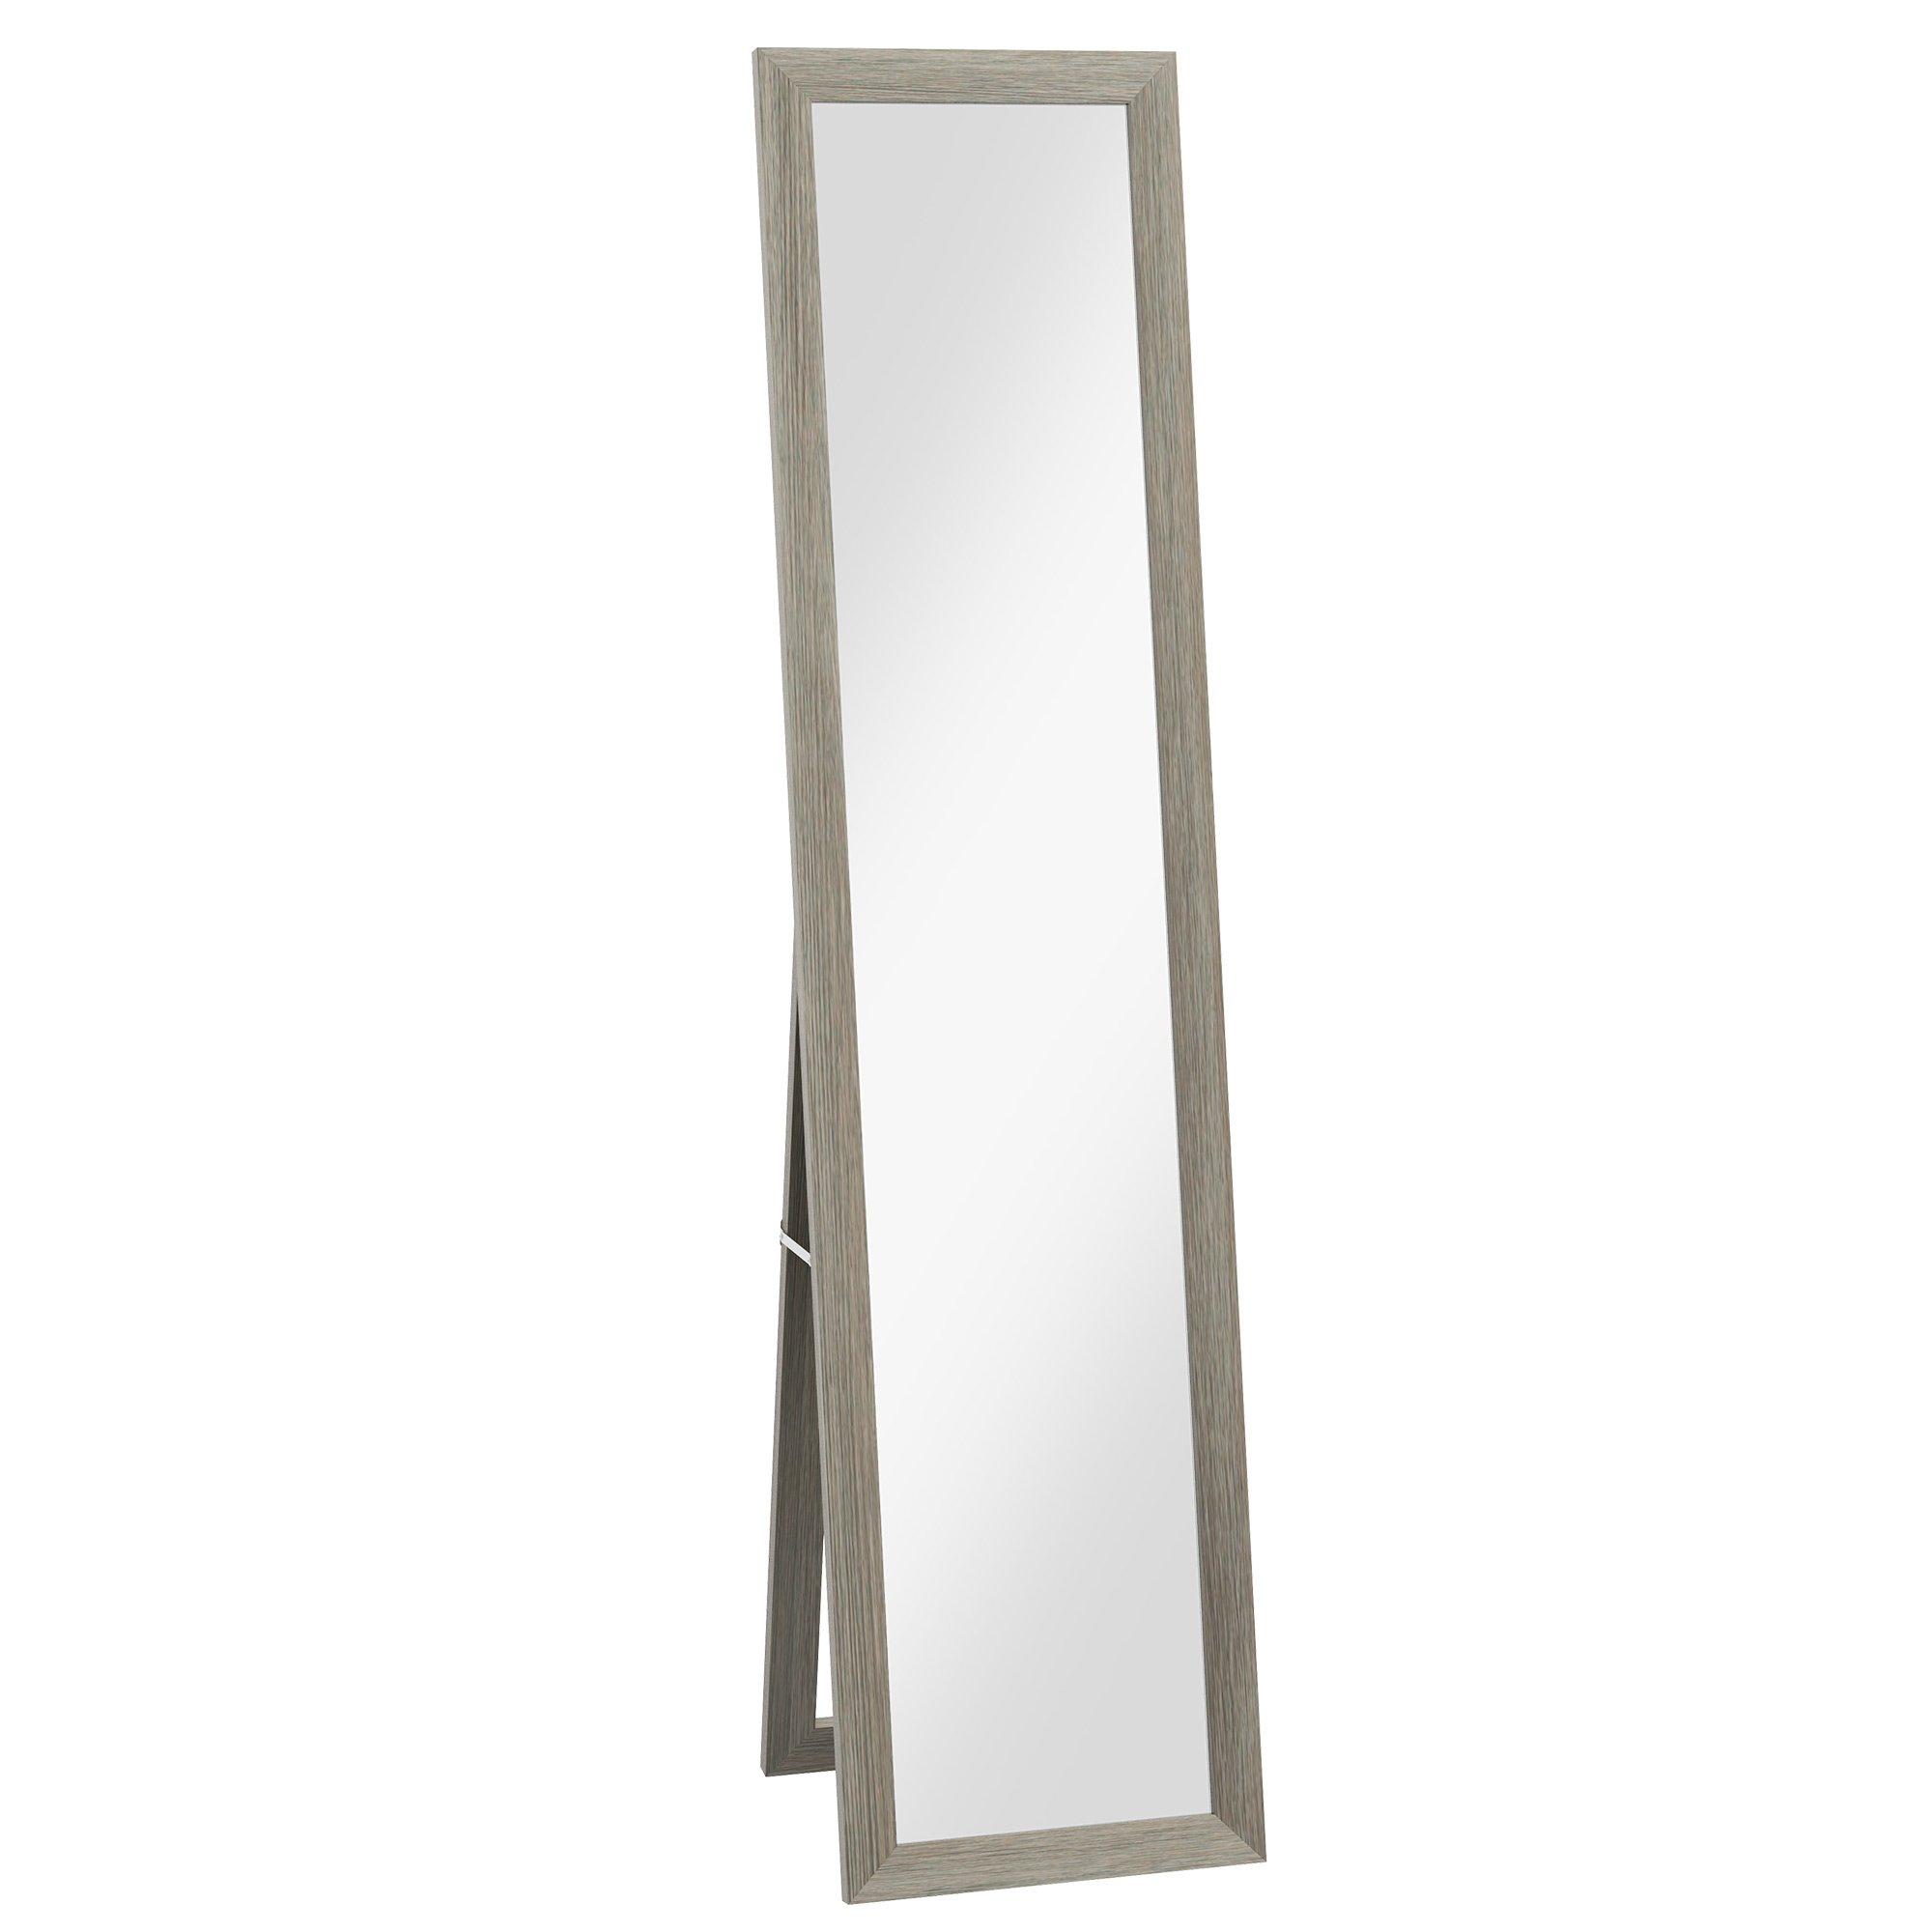 Full Length Mirror, Farmhouse Wall Mirror, Hanging and Freestanding